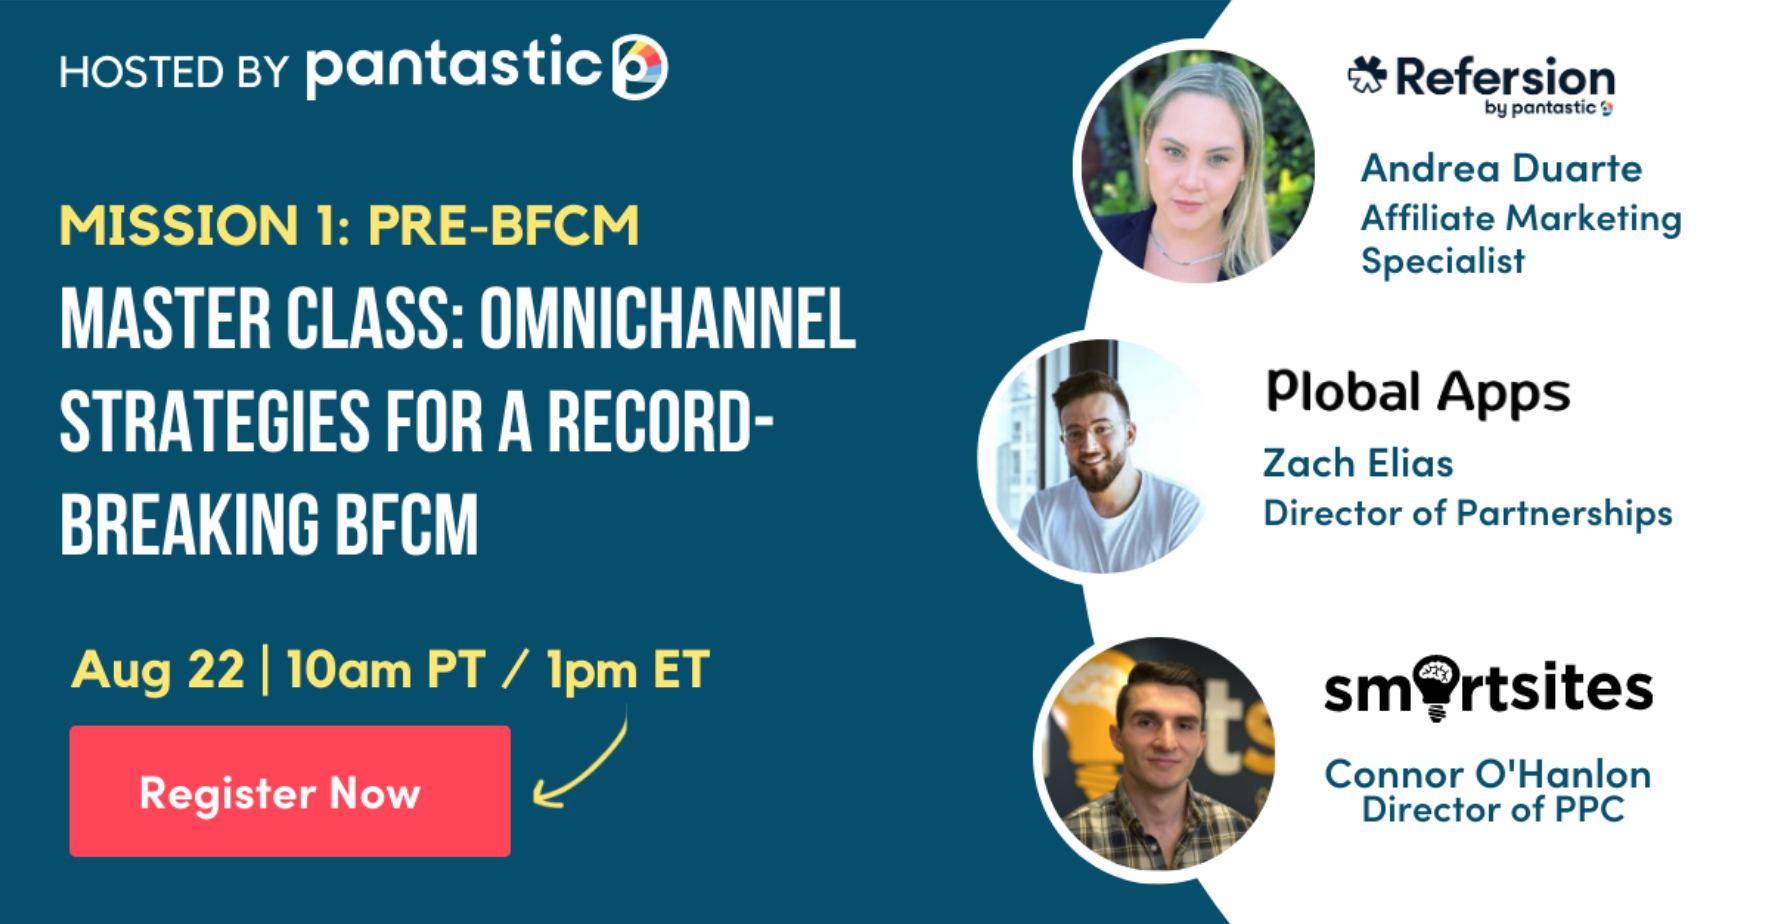 Omni-channel Strategies for a Record Breaking BFCM